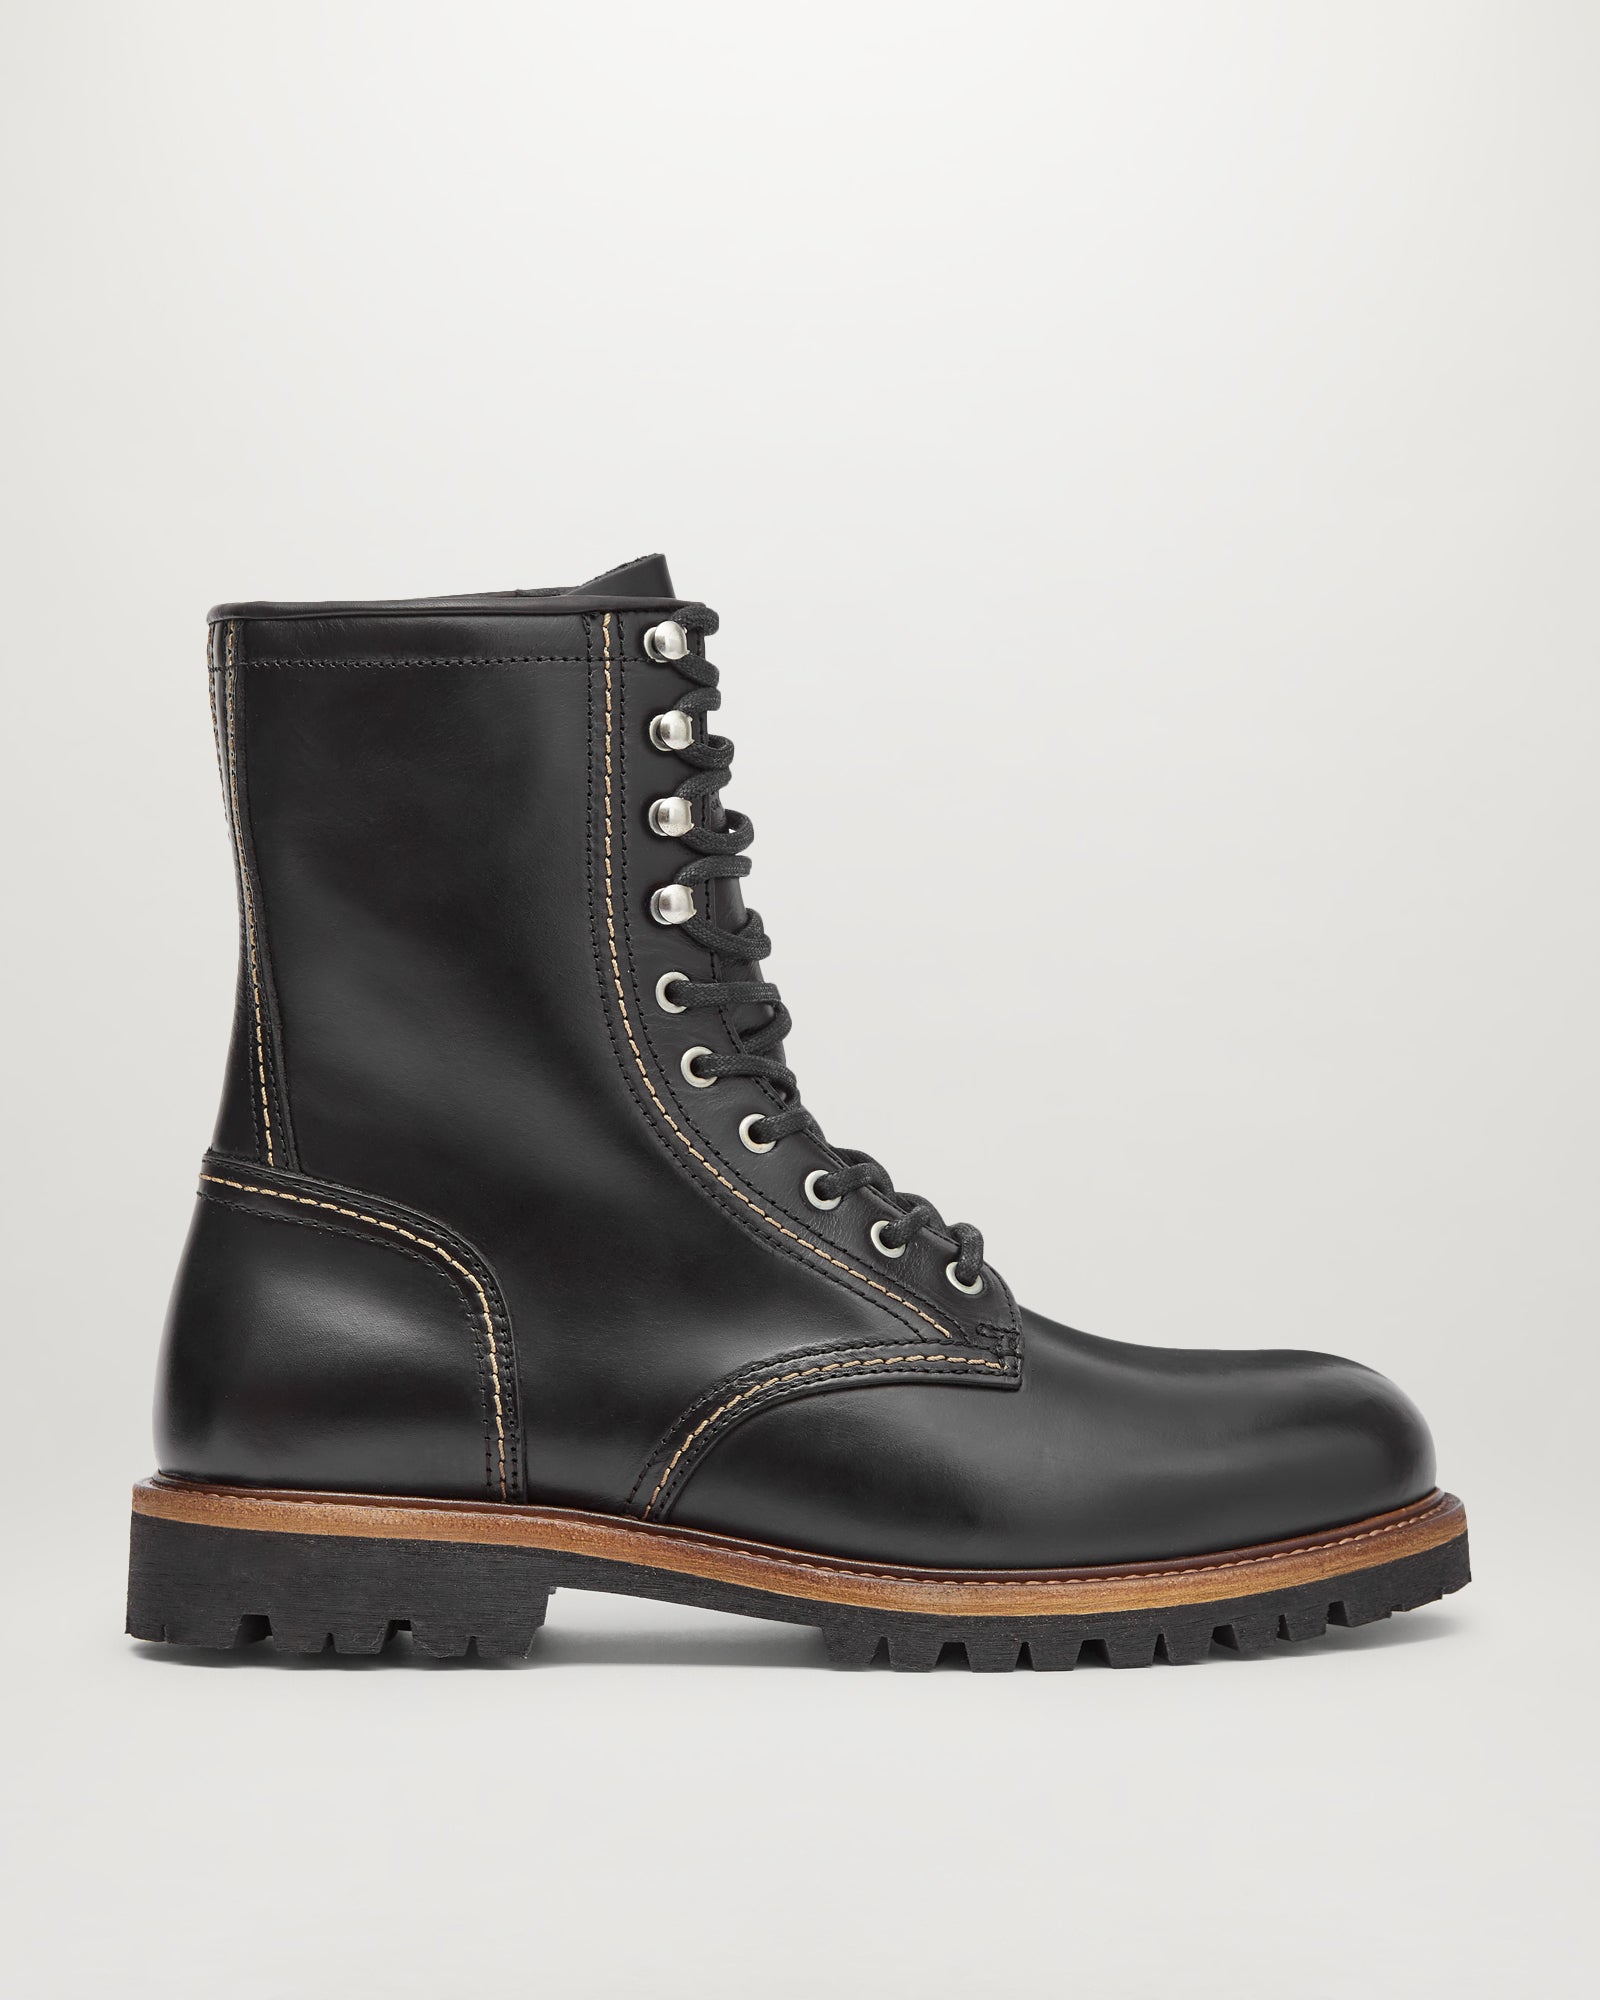 Men's Oiled Leather Lace Up Boots in Belstaff